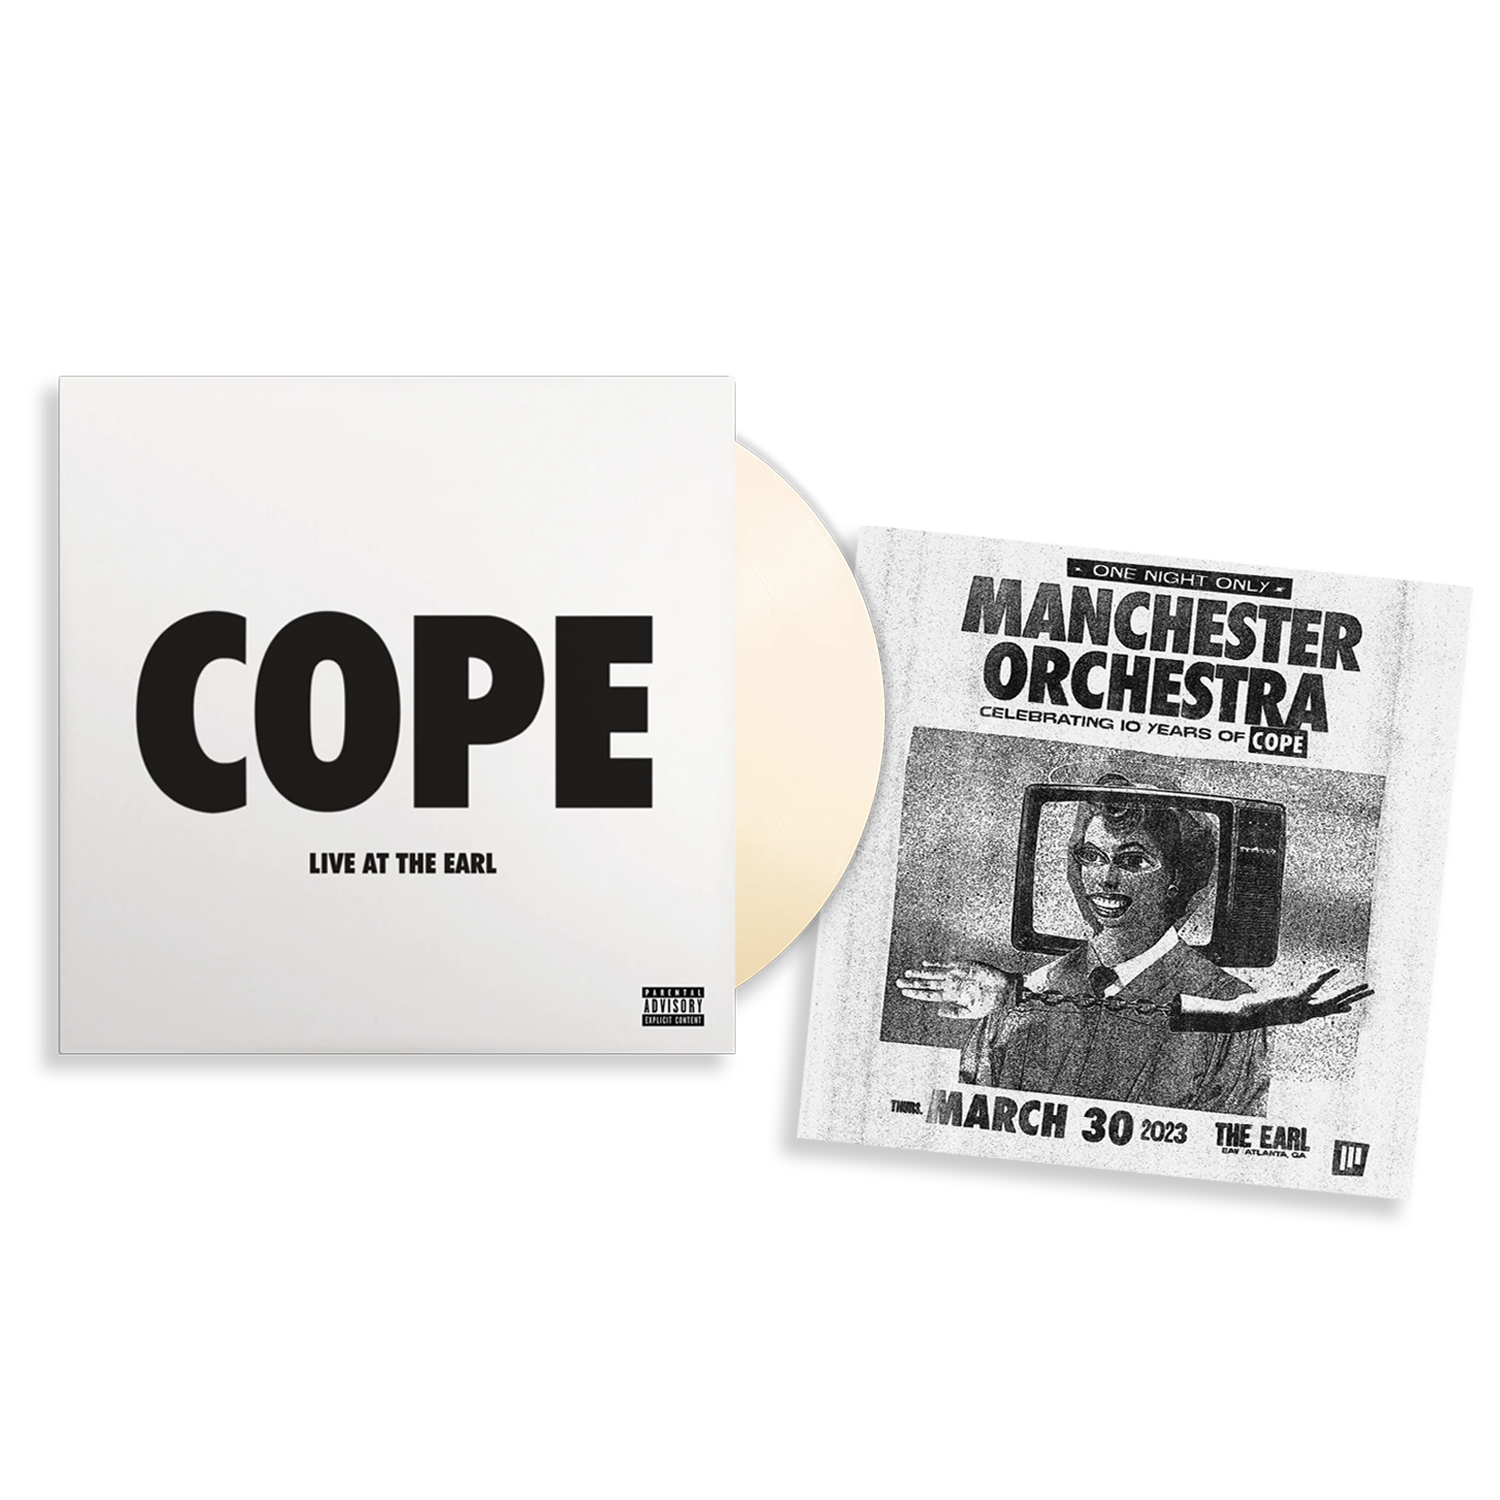 COPE - Live at The Earl: Limited 'Bone' Vinyl LP + Exclusive Print